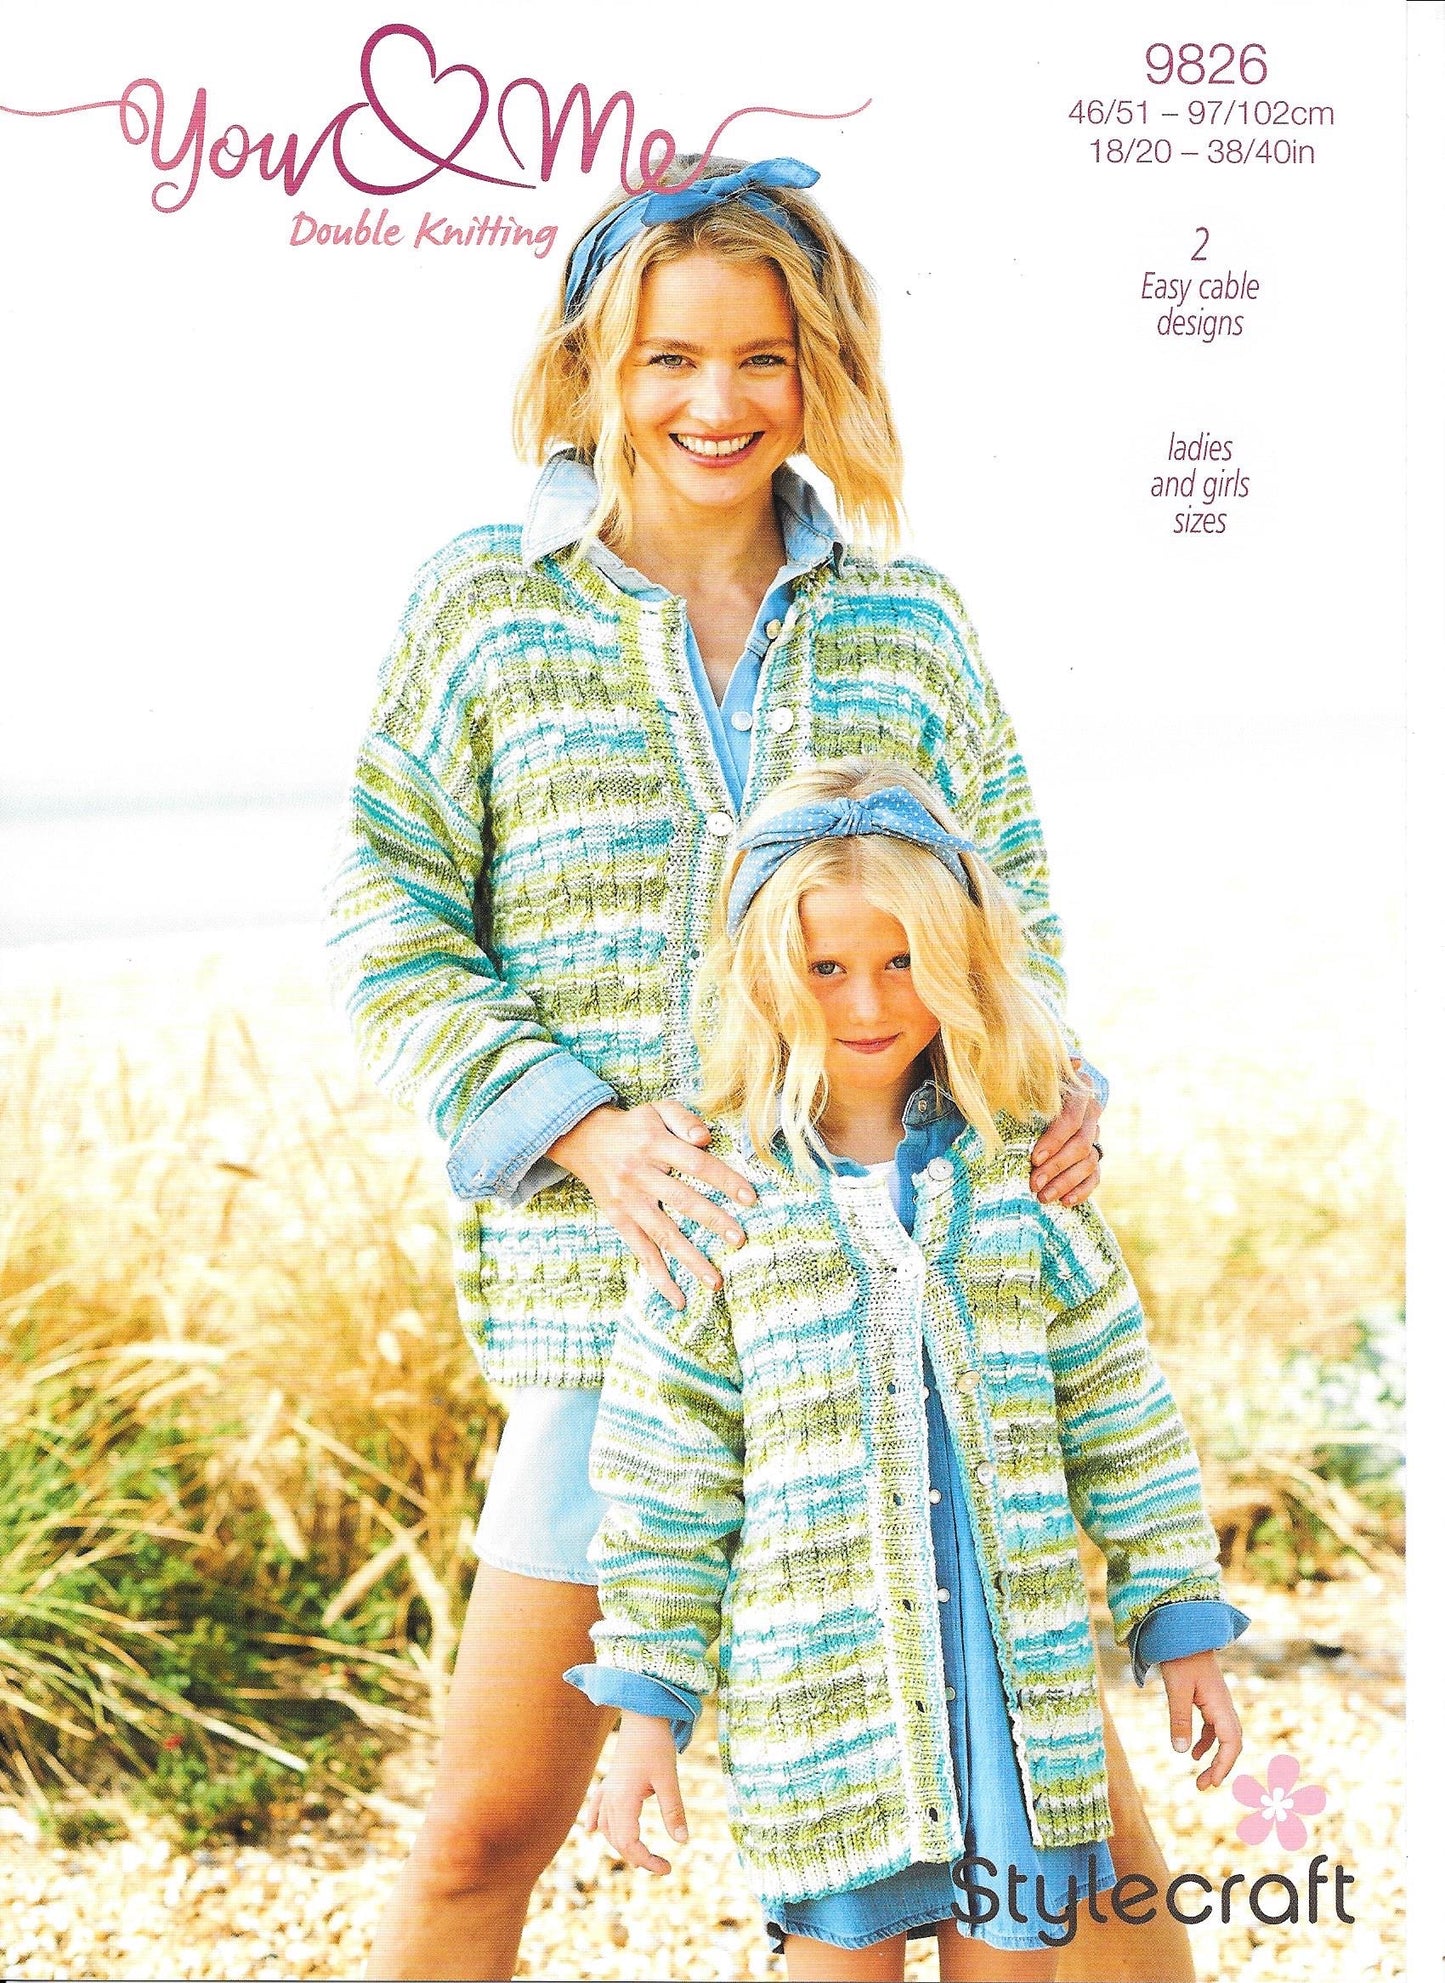 9826 Stylecraft You & Me dk lady and girl cardigan and sweater knitting pattern